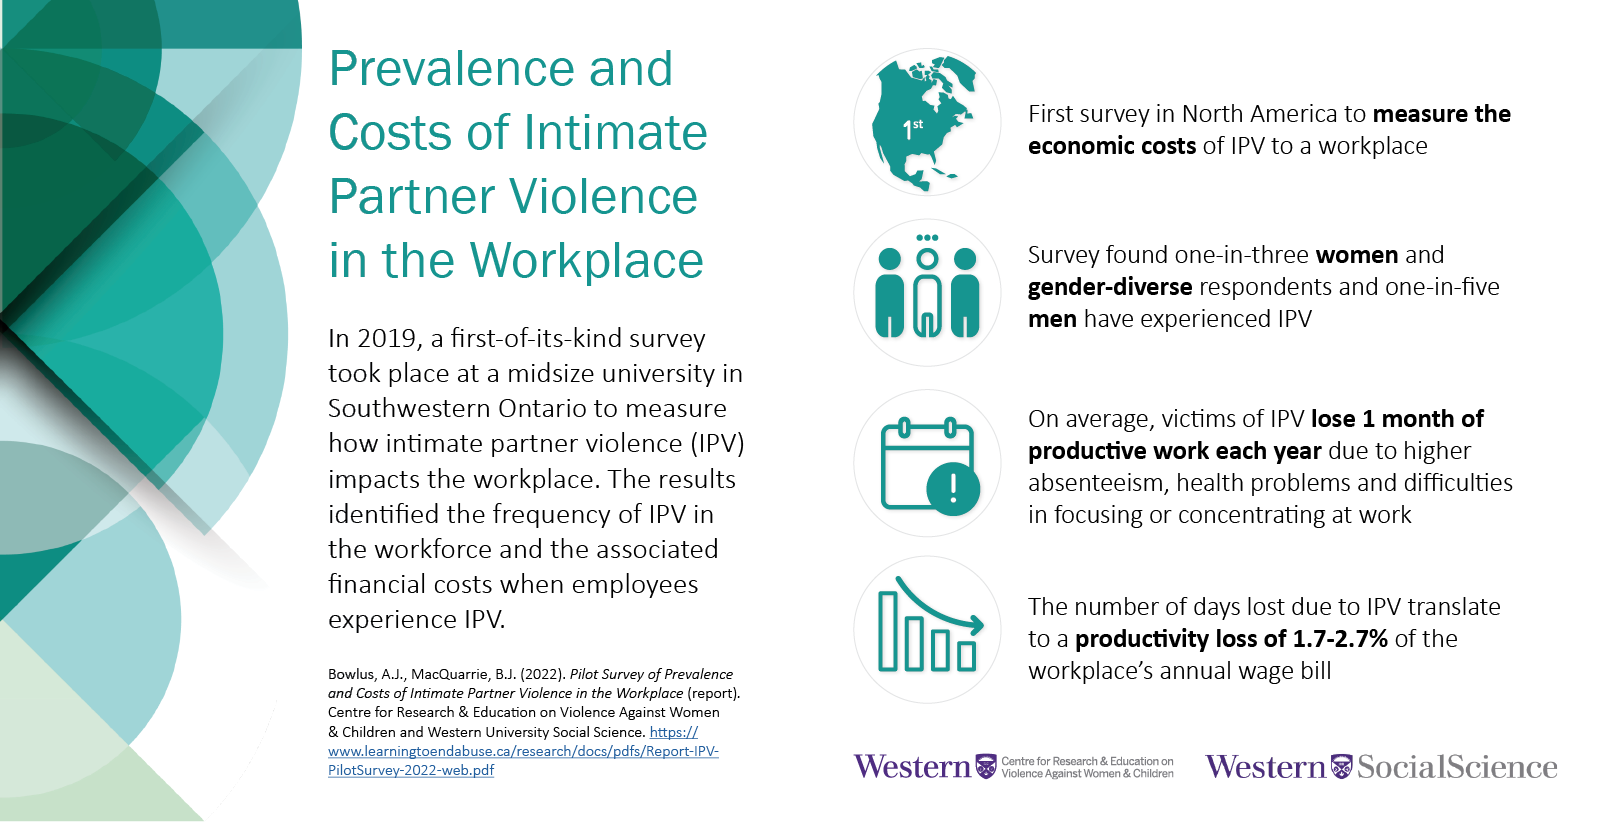 Infographic on prevalence and costs of intimate partner violence in the workplace